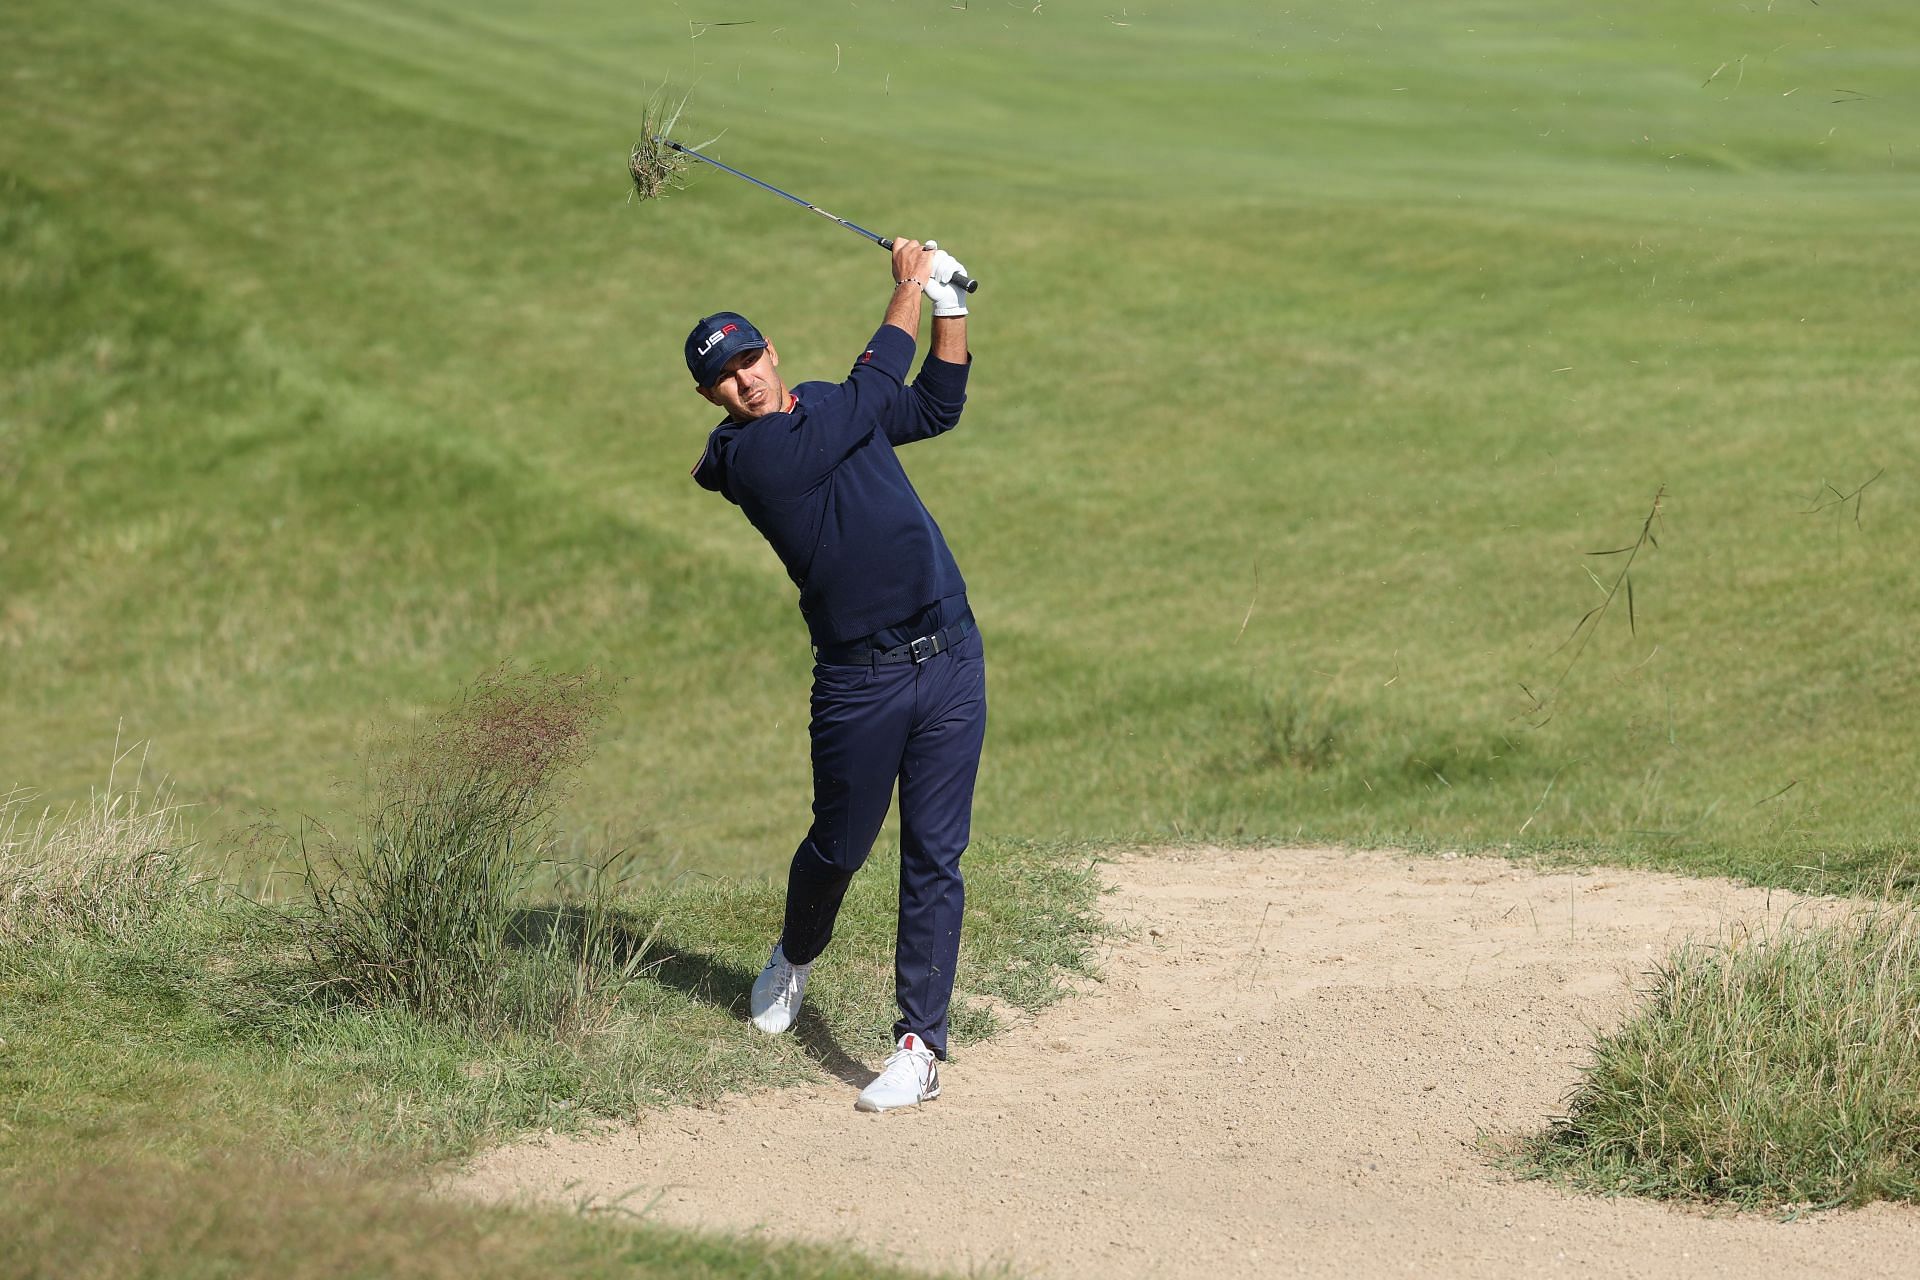 Brooks Koepka playing at the 43rd Ryder Cup. 2021 (Image via Getty).